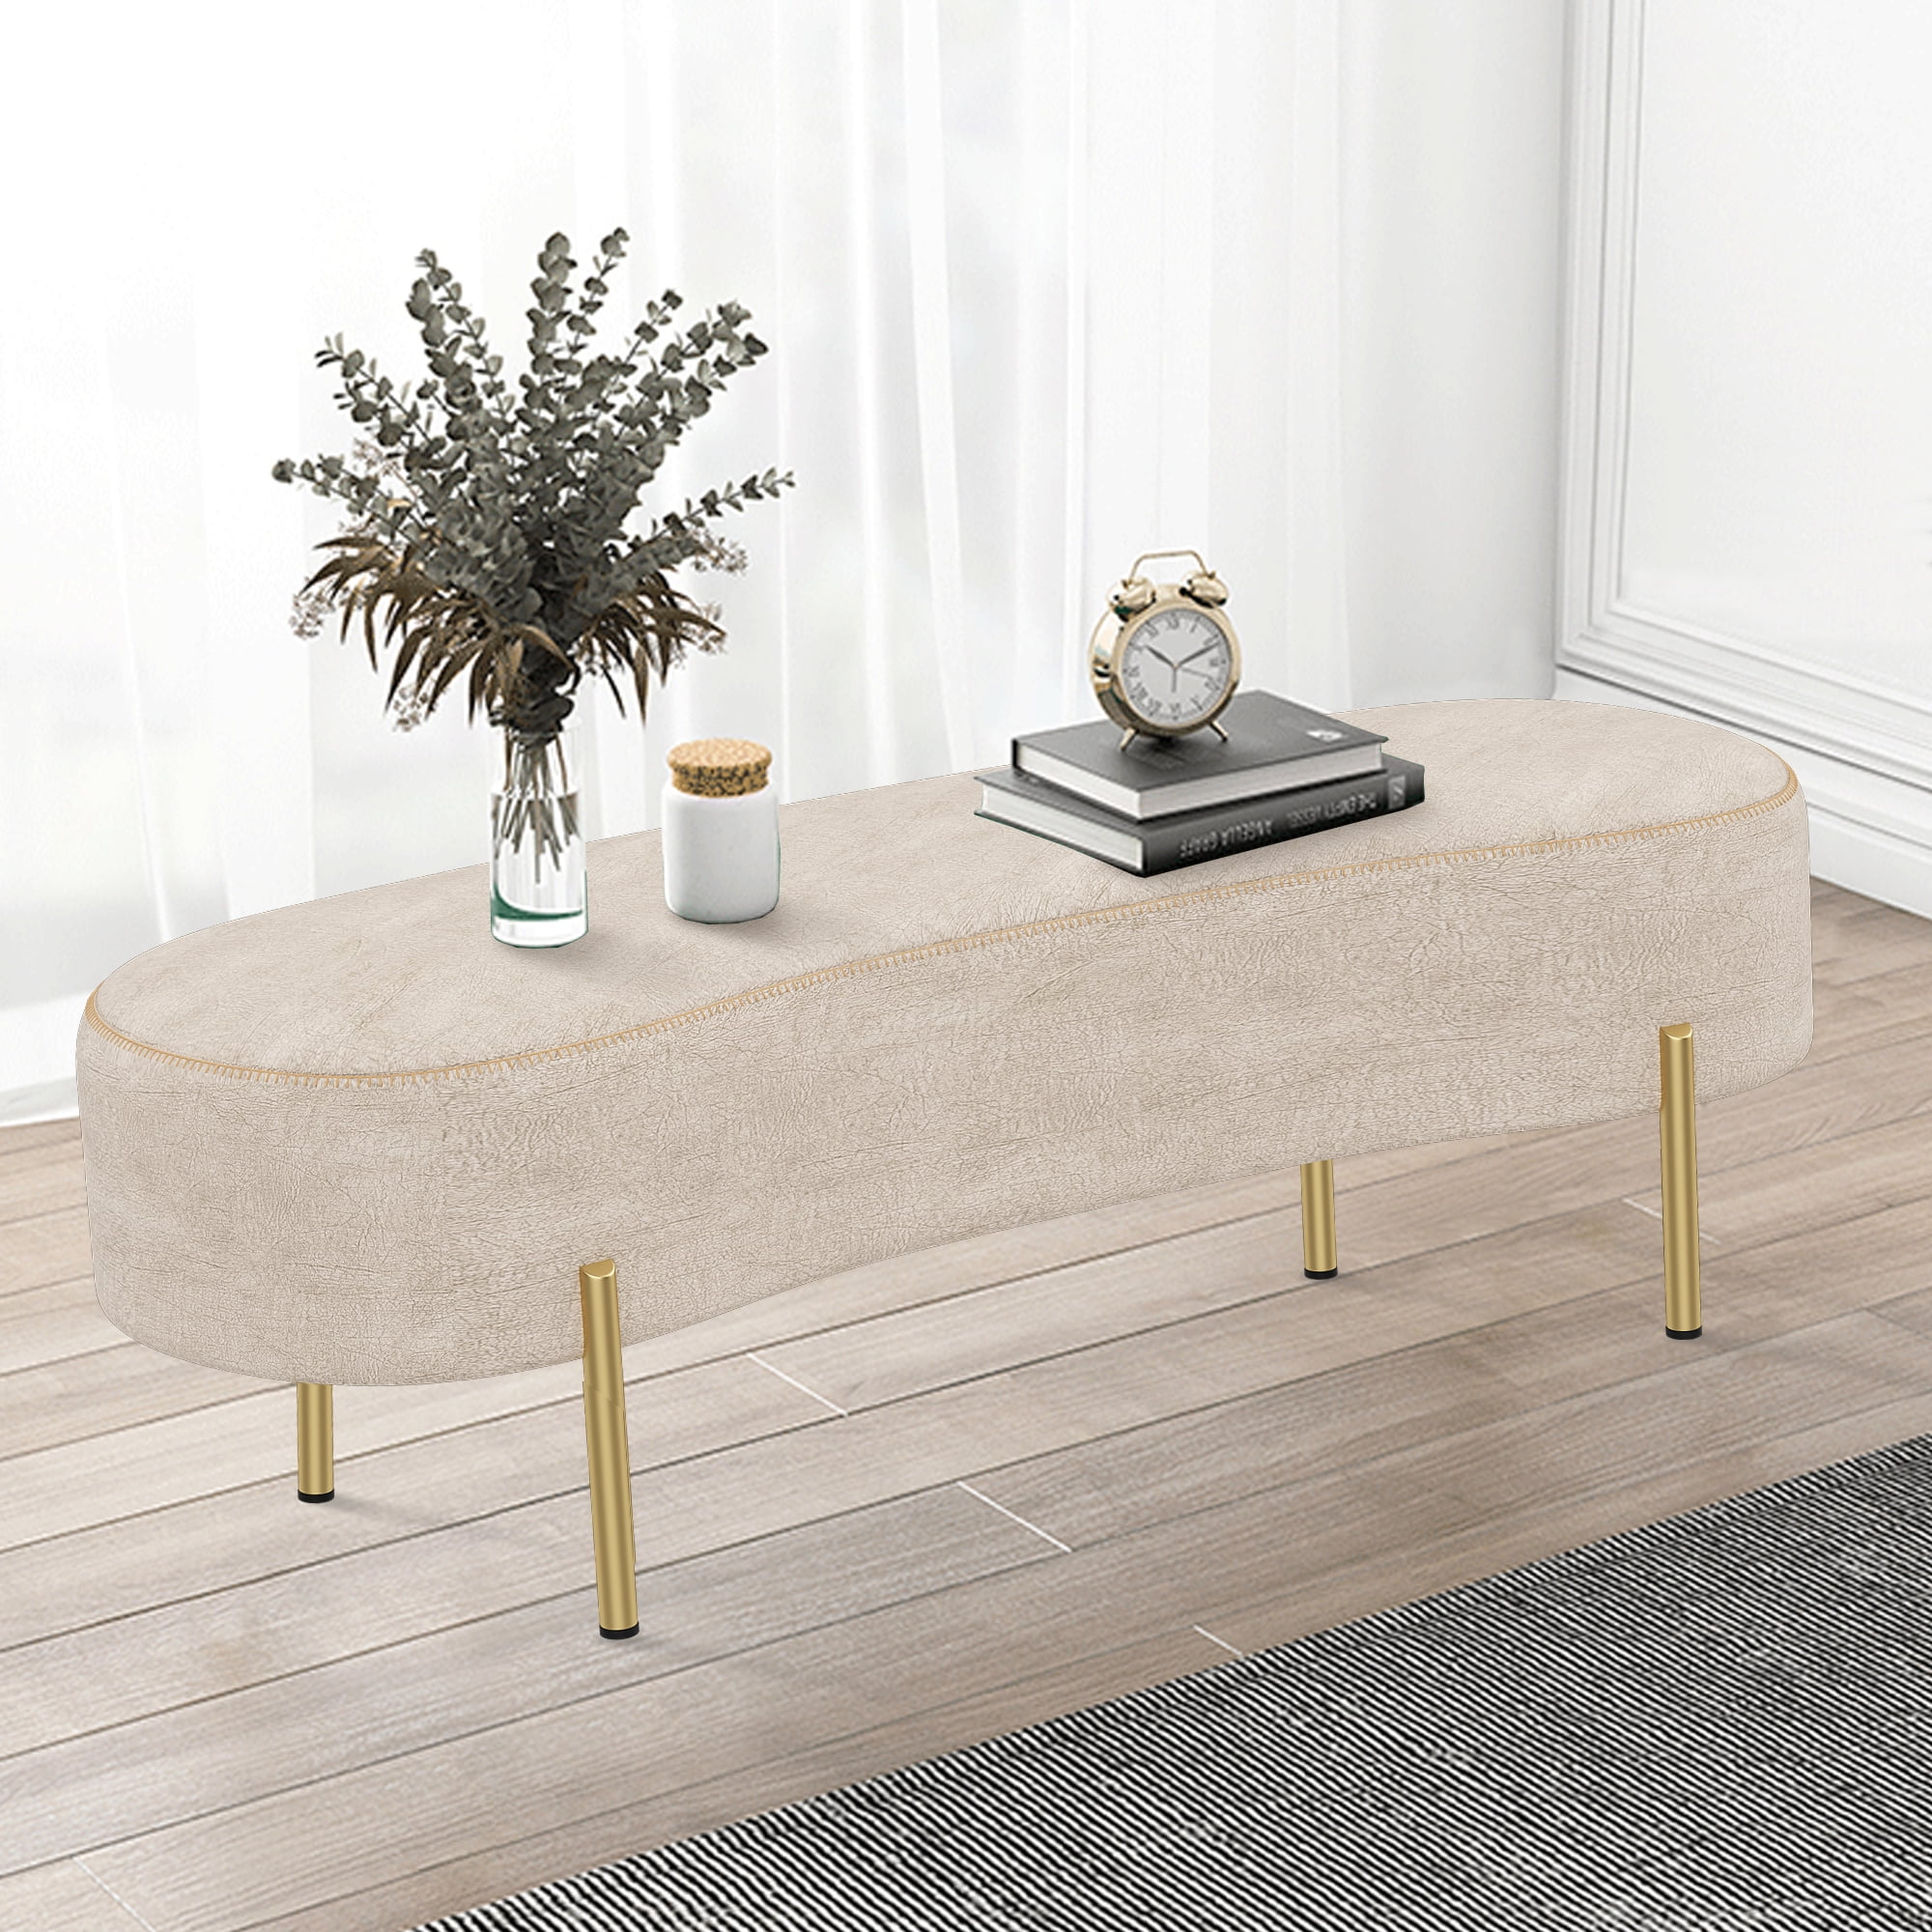 Andeworld Upholstered Ottoman Bench Seat with Gold Legs,Sitting Bench  Living Room Bench for Bedroom Indoor Benches(Beige)